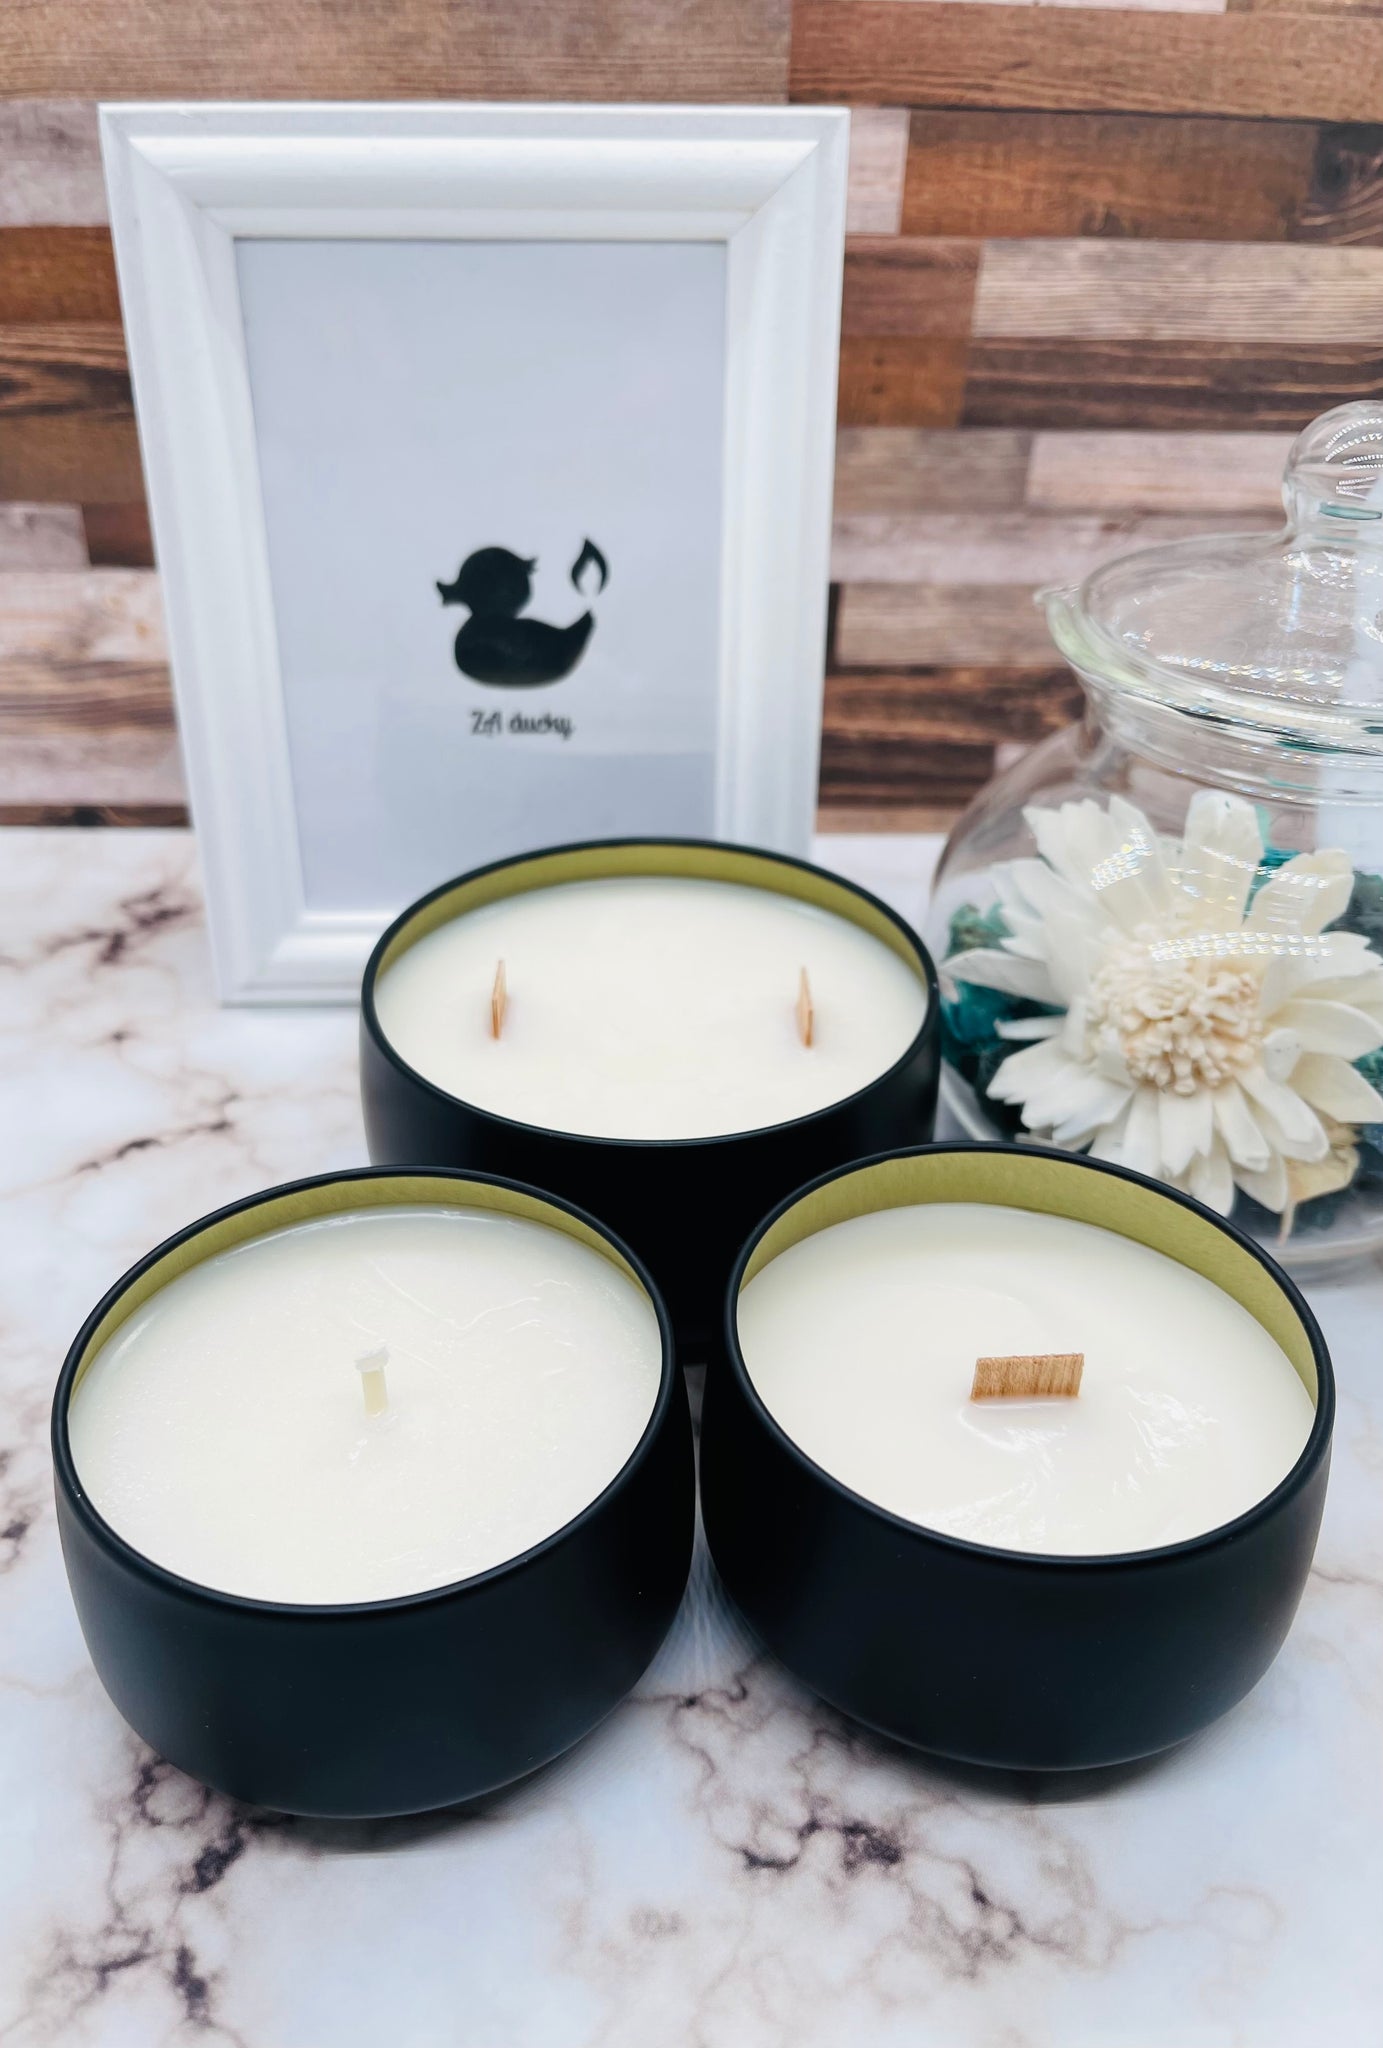 4 oz. Tin 100% Soy Wax Scented Candle